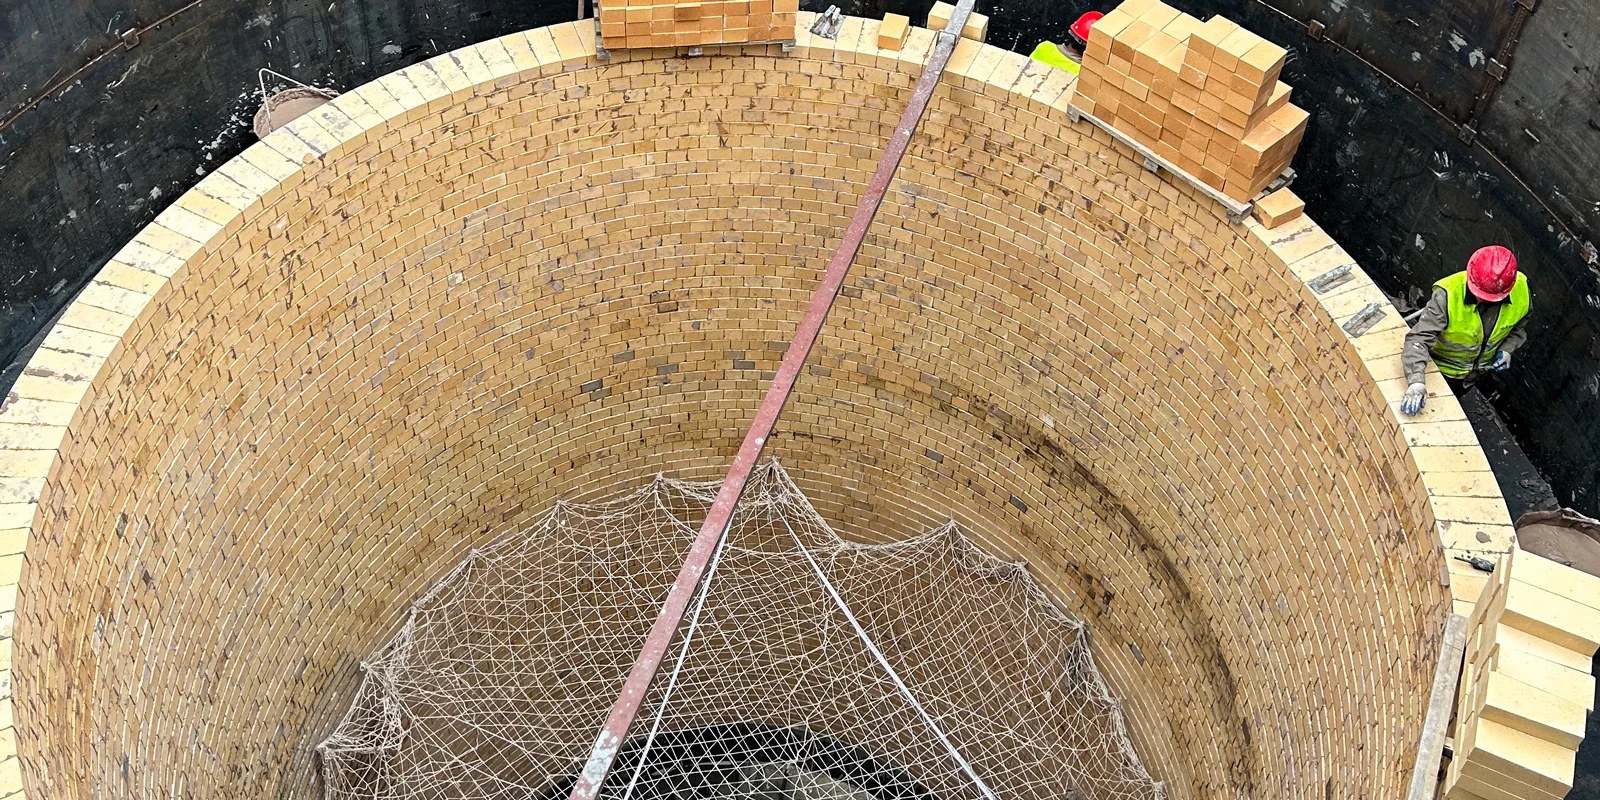 Construction Site of Refractory Bricks in Lime Kiln